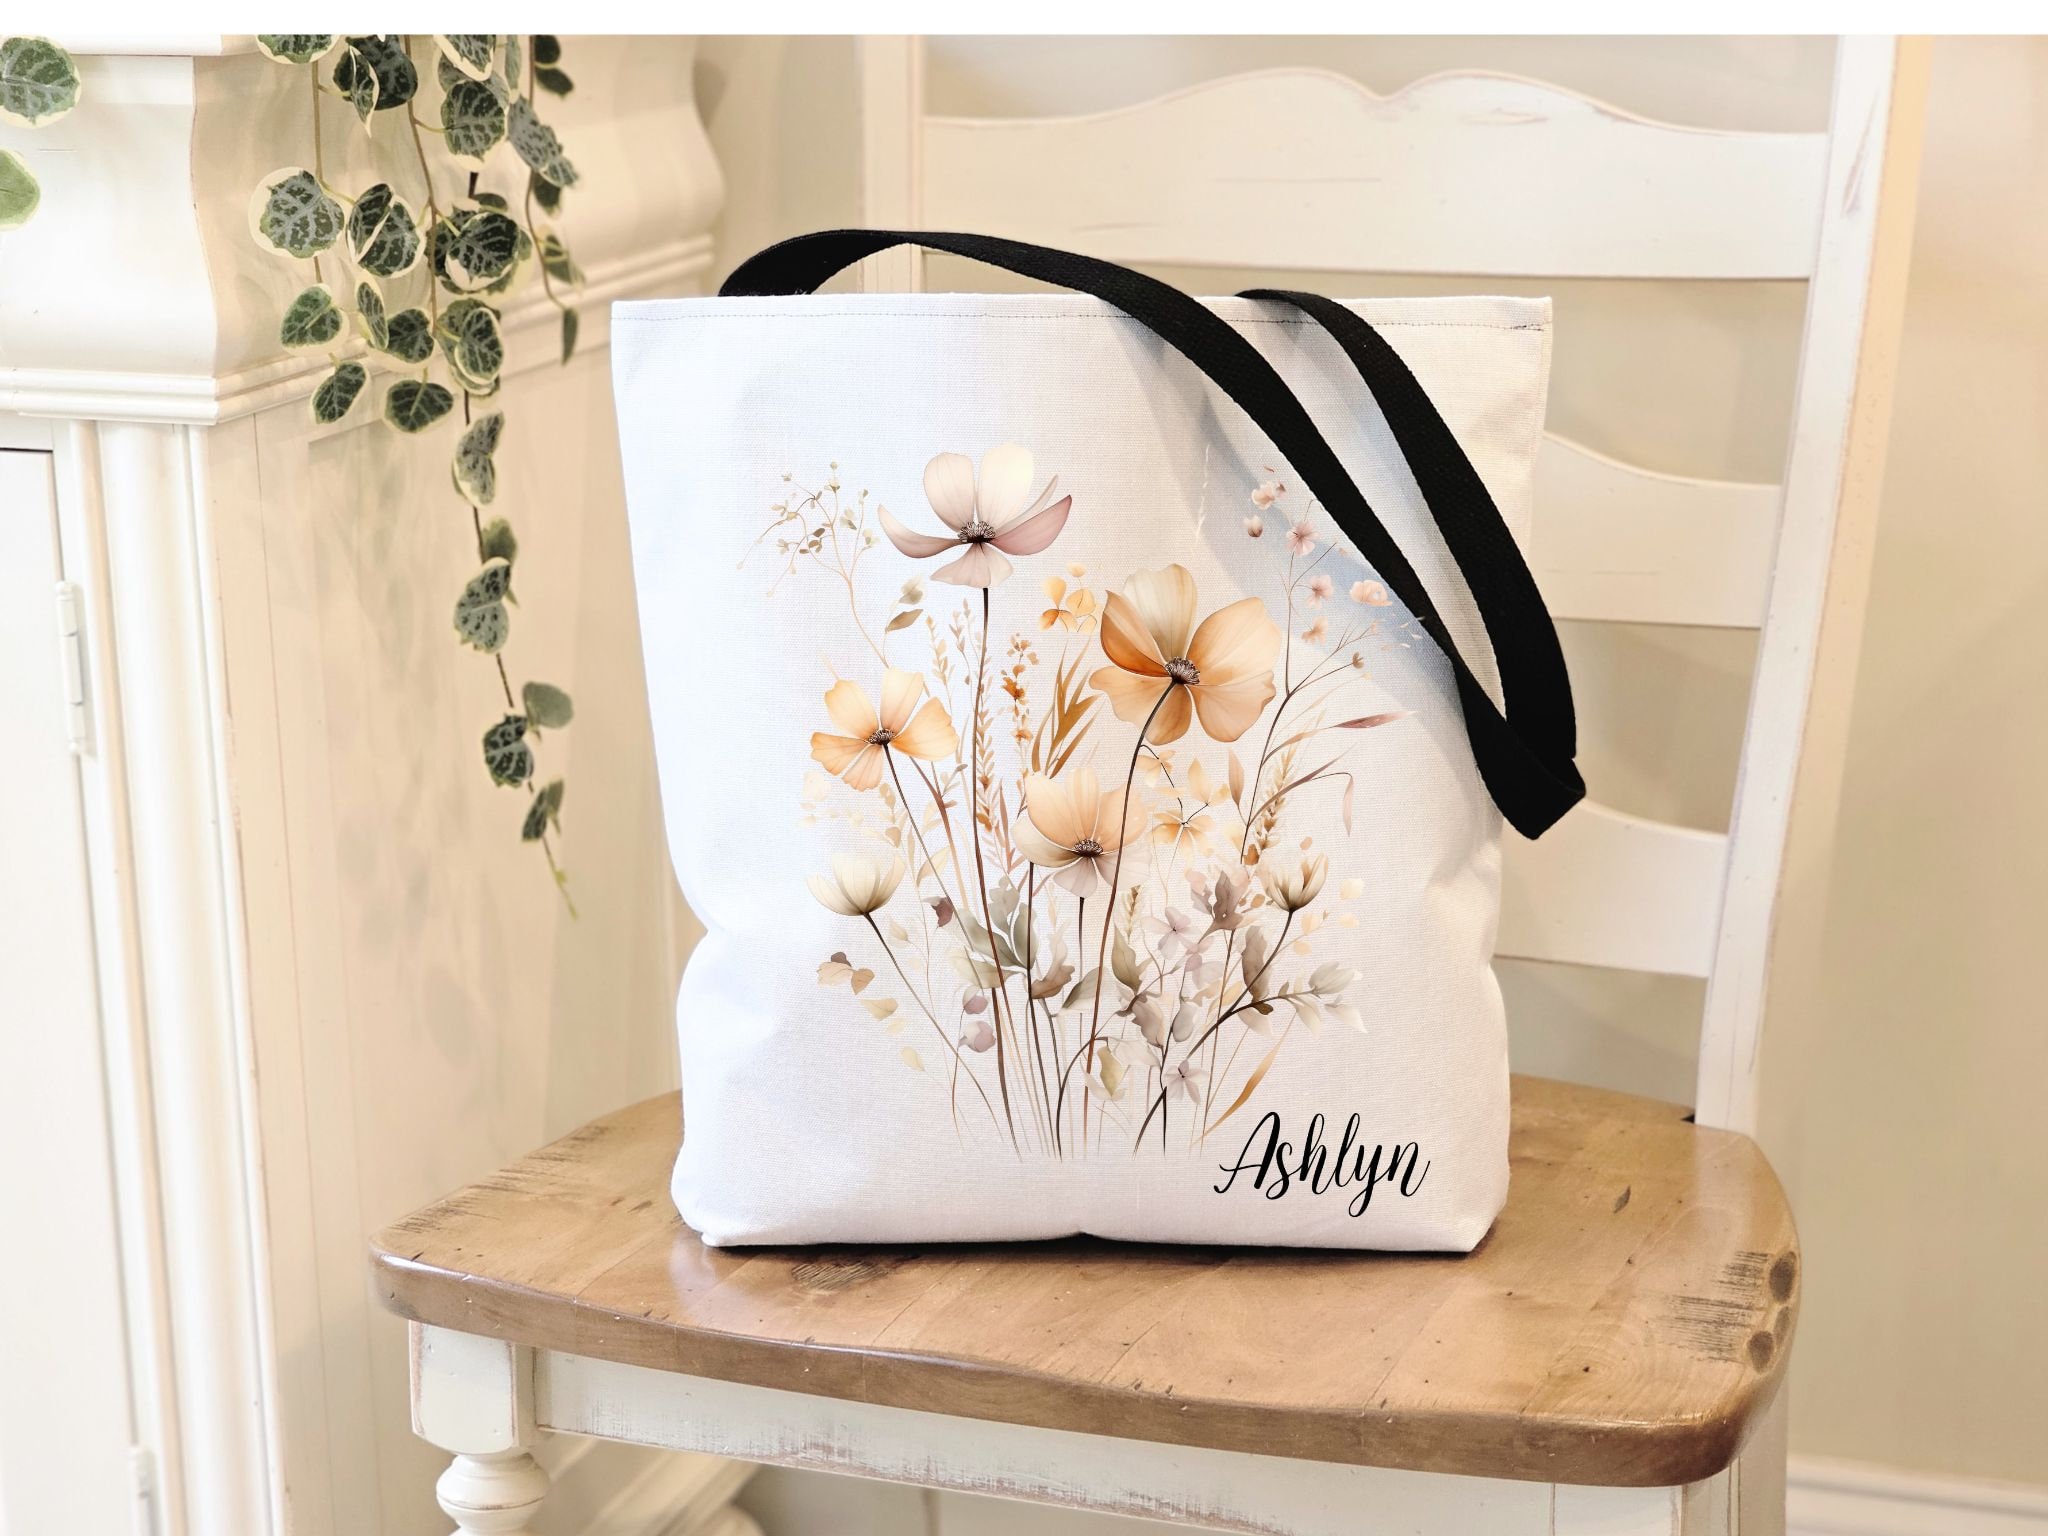 Flower Tote Bag - Wildflower, Floral, Canvas Tote Bag with Zipper, Lar –  McKinney Printing Company, LLC